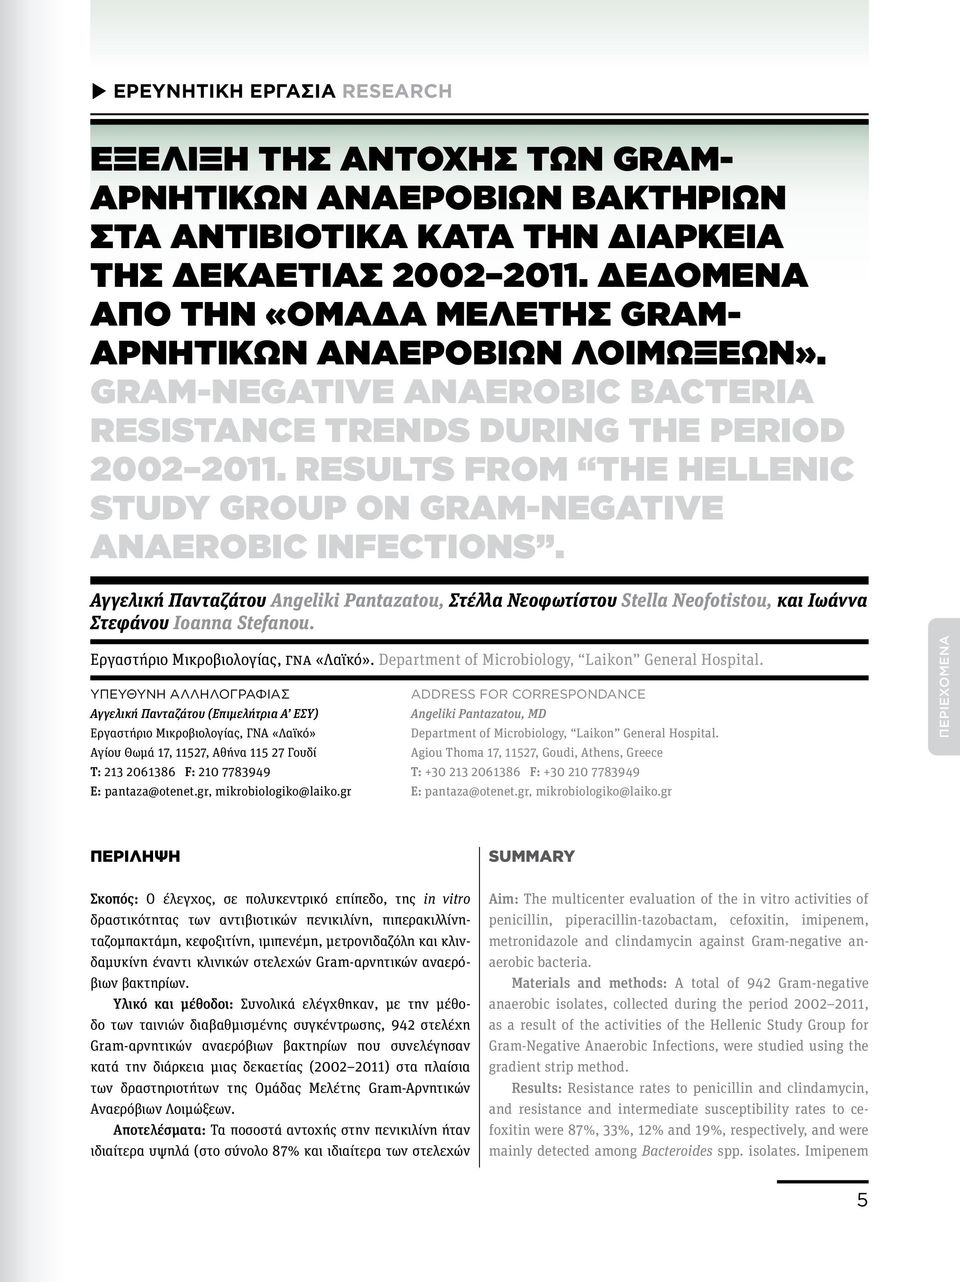 RESULTS FROM THE HELLENIC STUDY GROUP ON GRAM-NEGATIVE ANAEROBIC INFECTIONS. Αγγελική Πανταζάτου Angeliki Pantazatou, Στέλλα Νεοφωτίστου Stella Neofotistou, και Ιωάννα Στεφάνου Ioanna Stefanou.